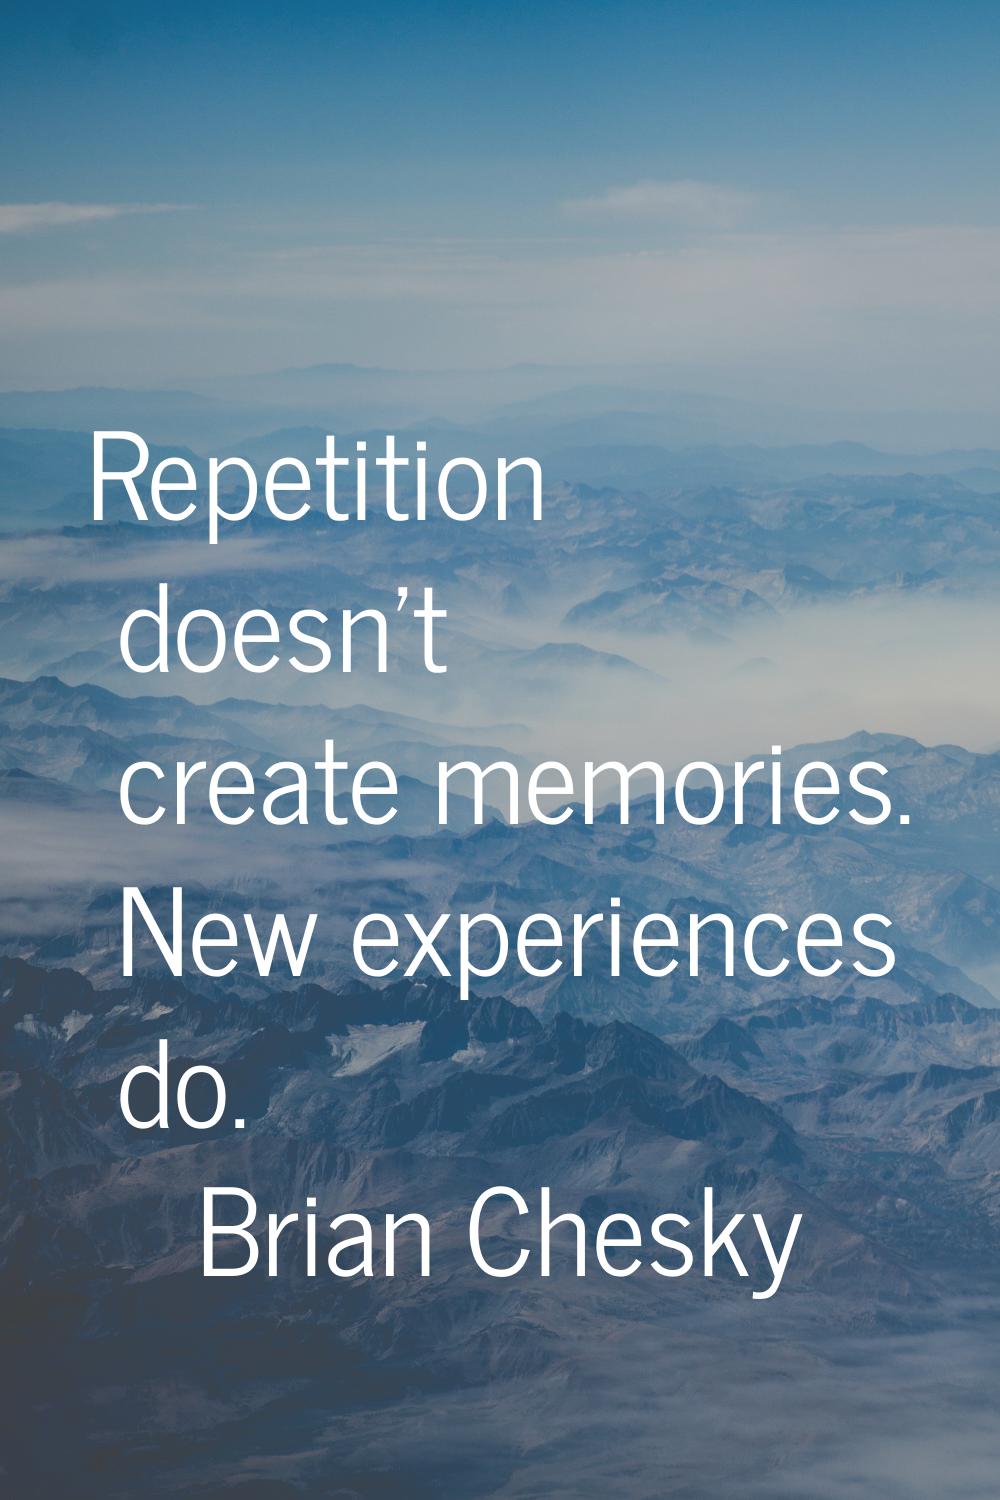 Repetition doesn't create memories. New experiences do.